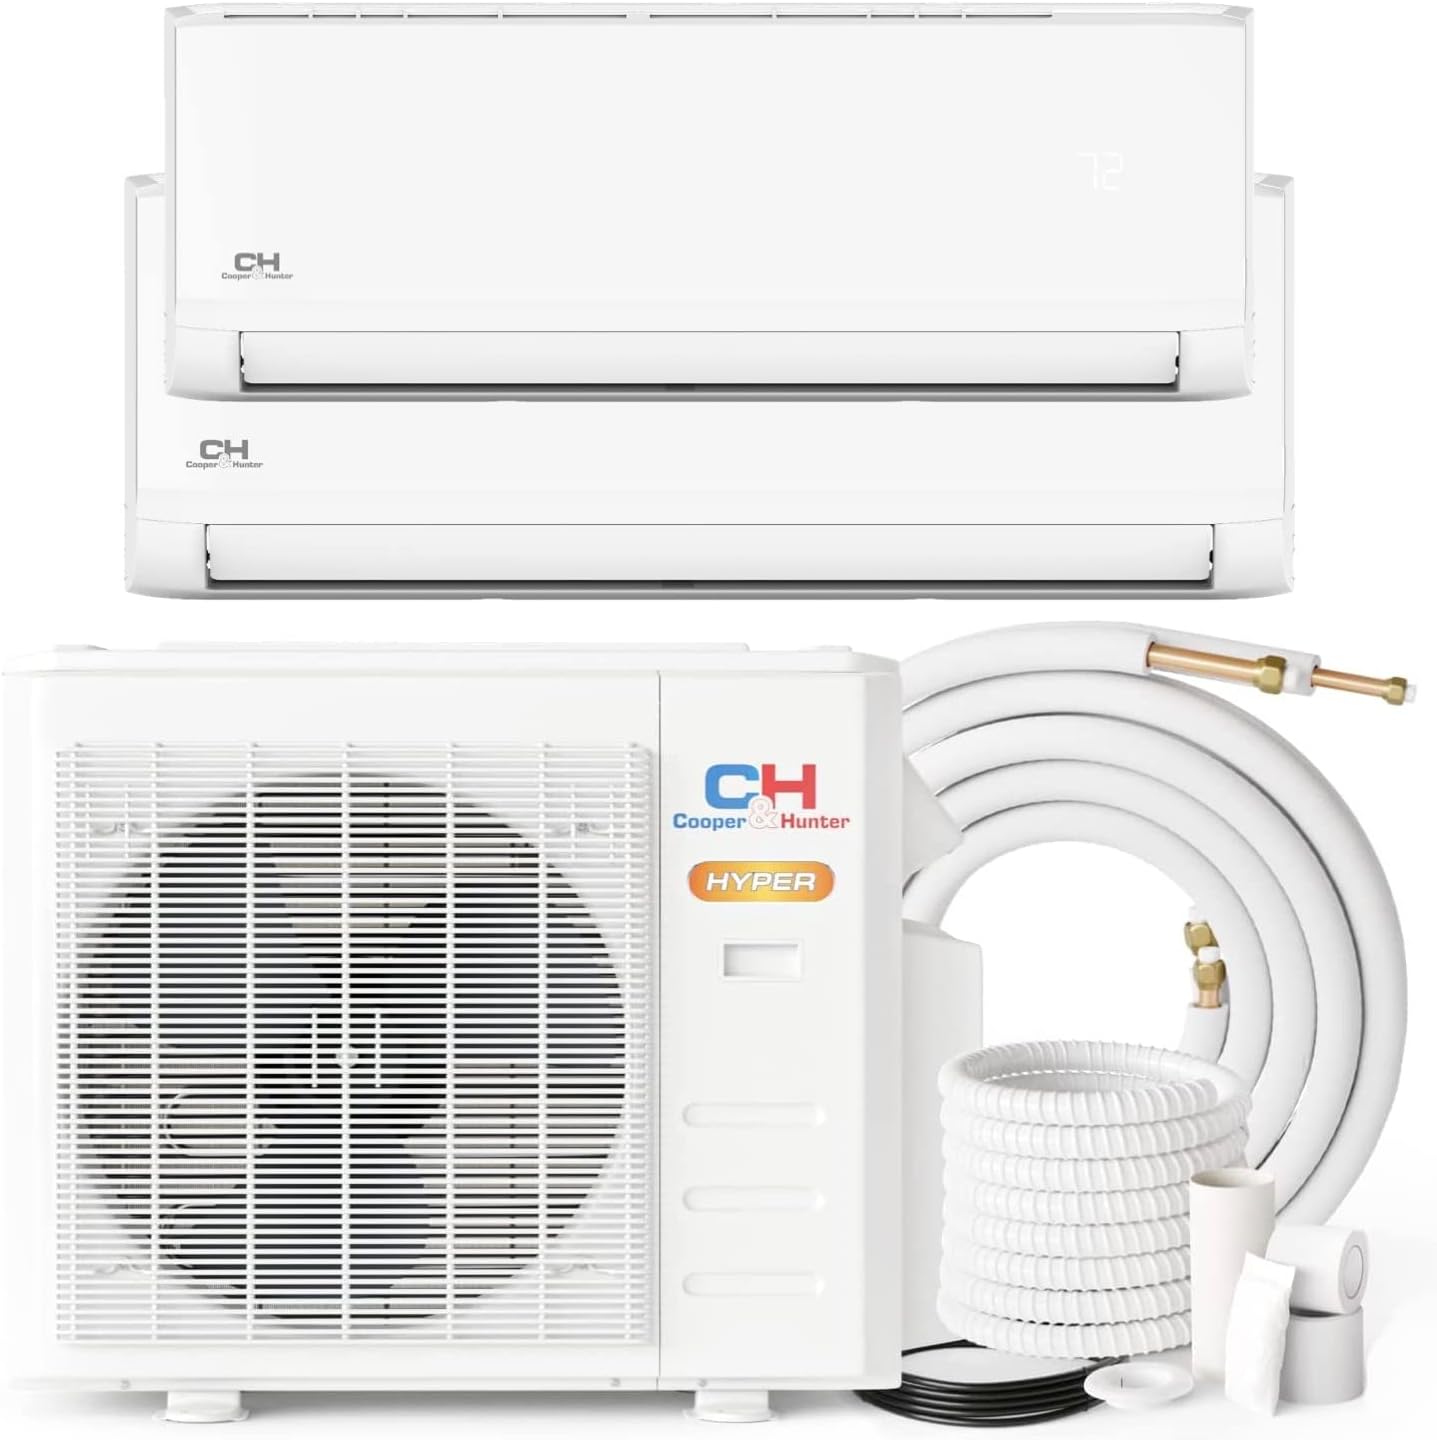 Cooper & Hunter Hyper Heat -22F Dual 2 Zone 12,000 + 18,000 BTU Ductless Mini Split Heat Pump Air Conditioner System Full Set with Two 25FT Installation Kits